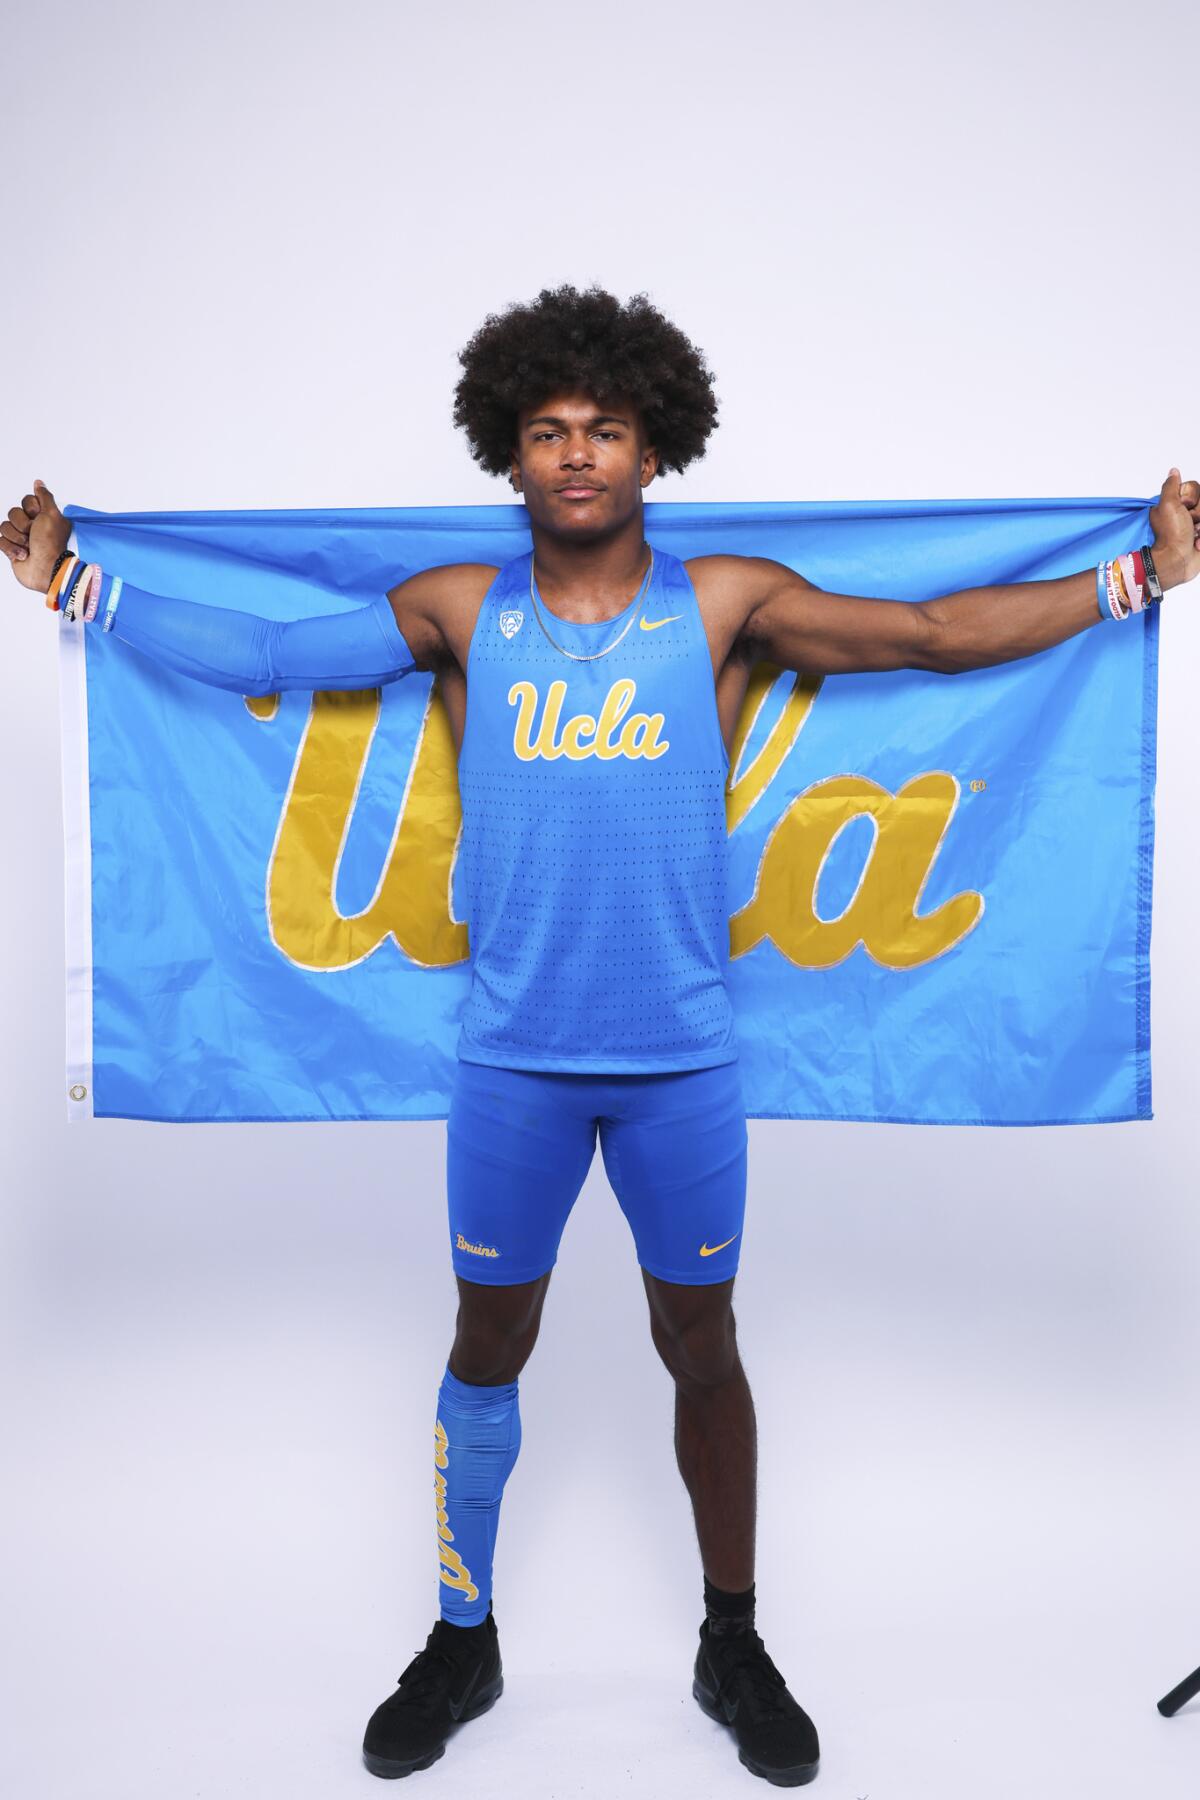 Karson Gordon poses for a photo while announcing UCLA as his college choice.